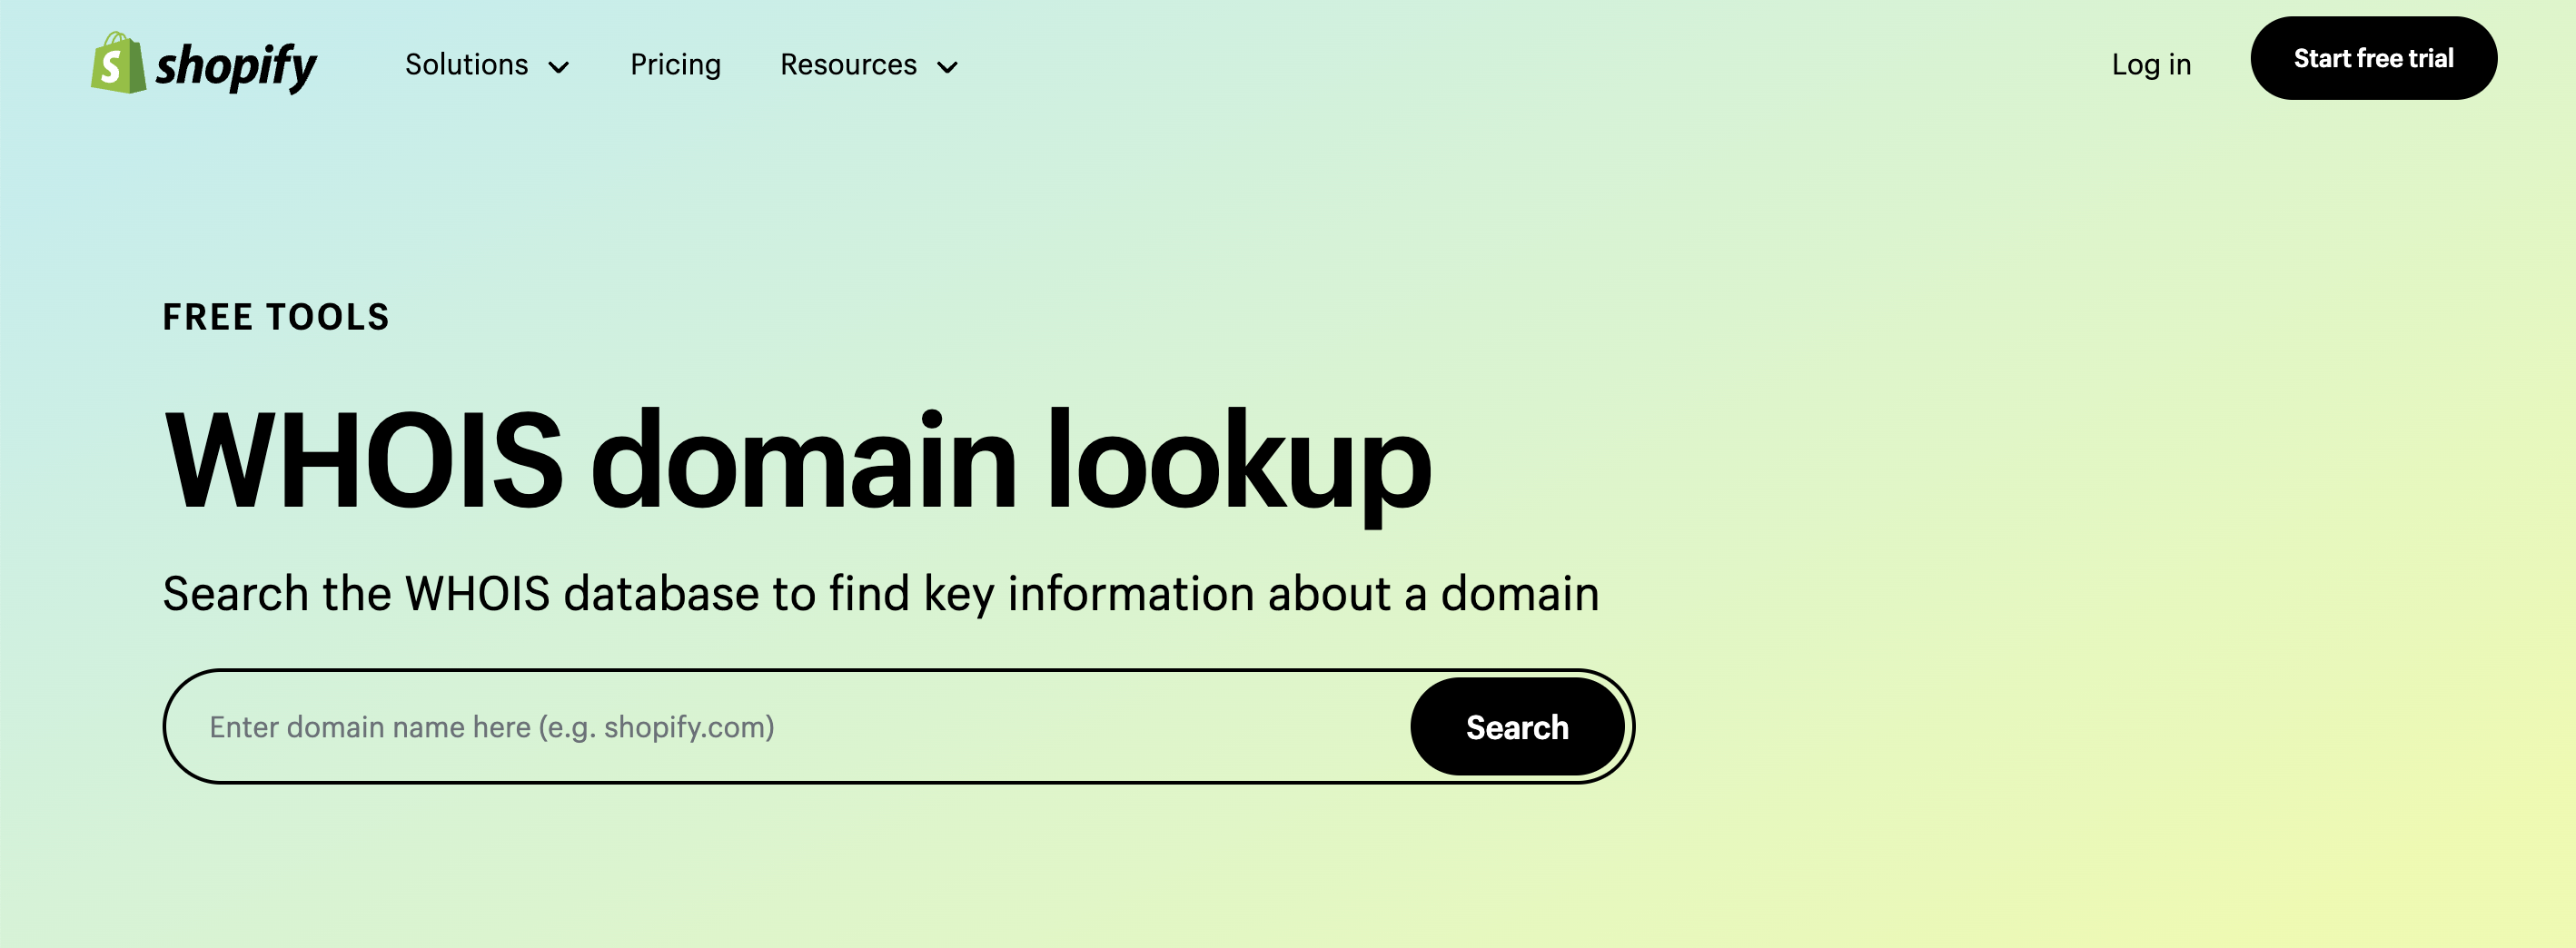 Shopify's free WHOIS domain lookup tool